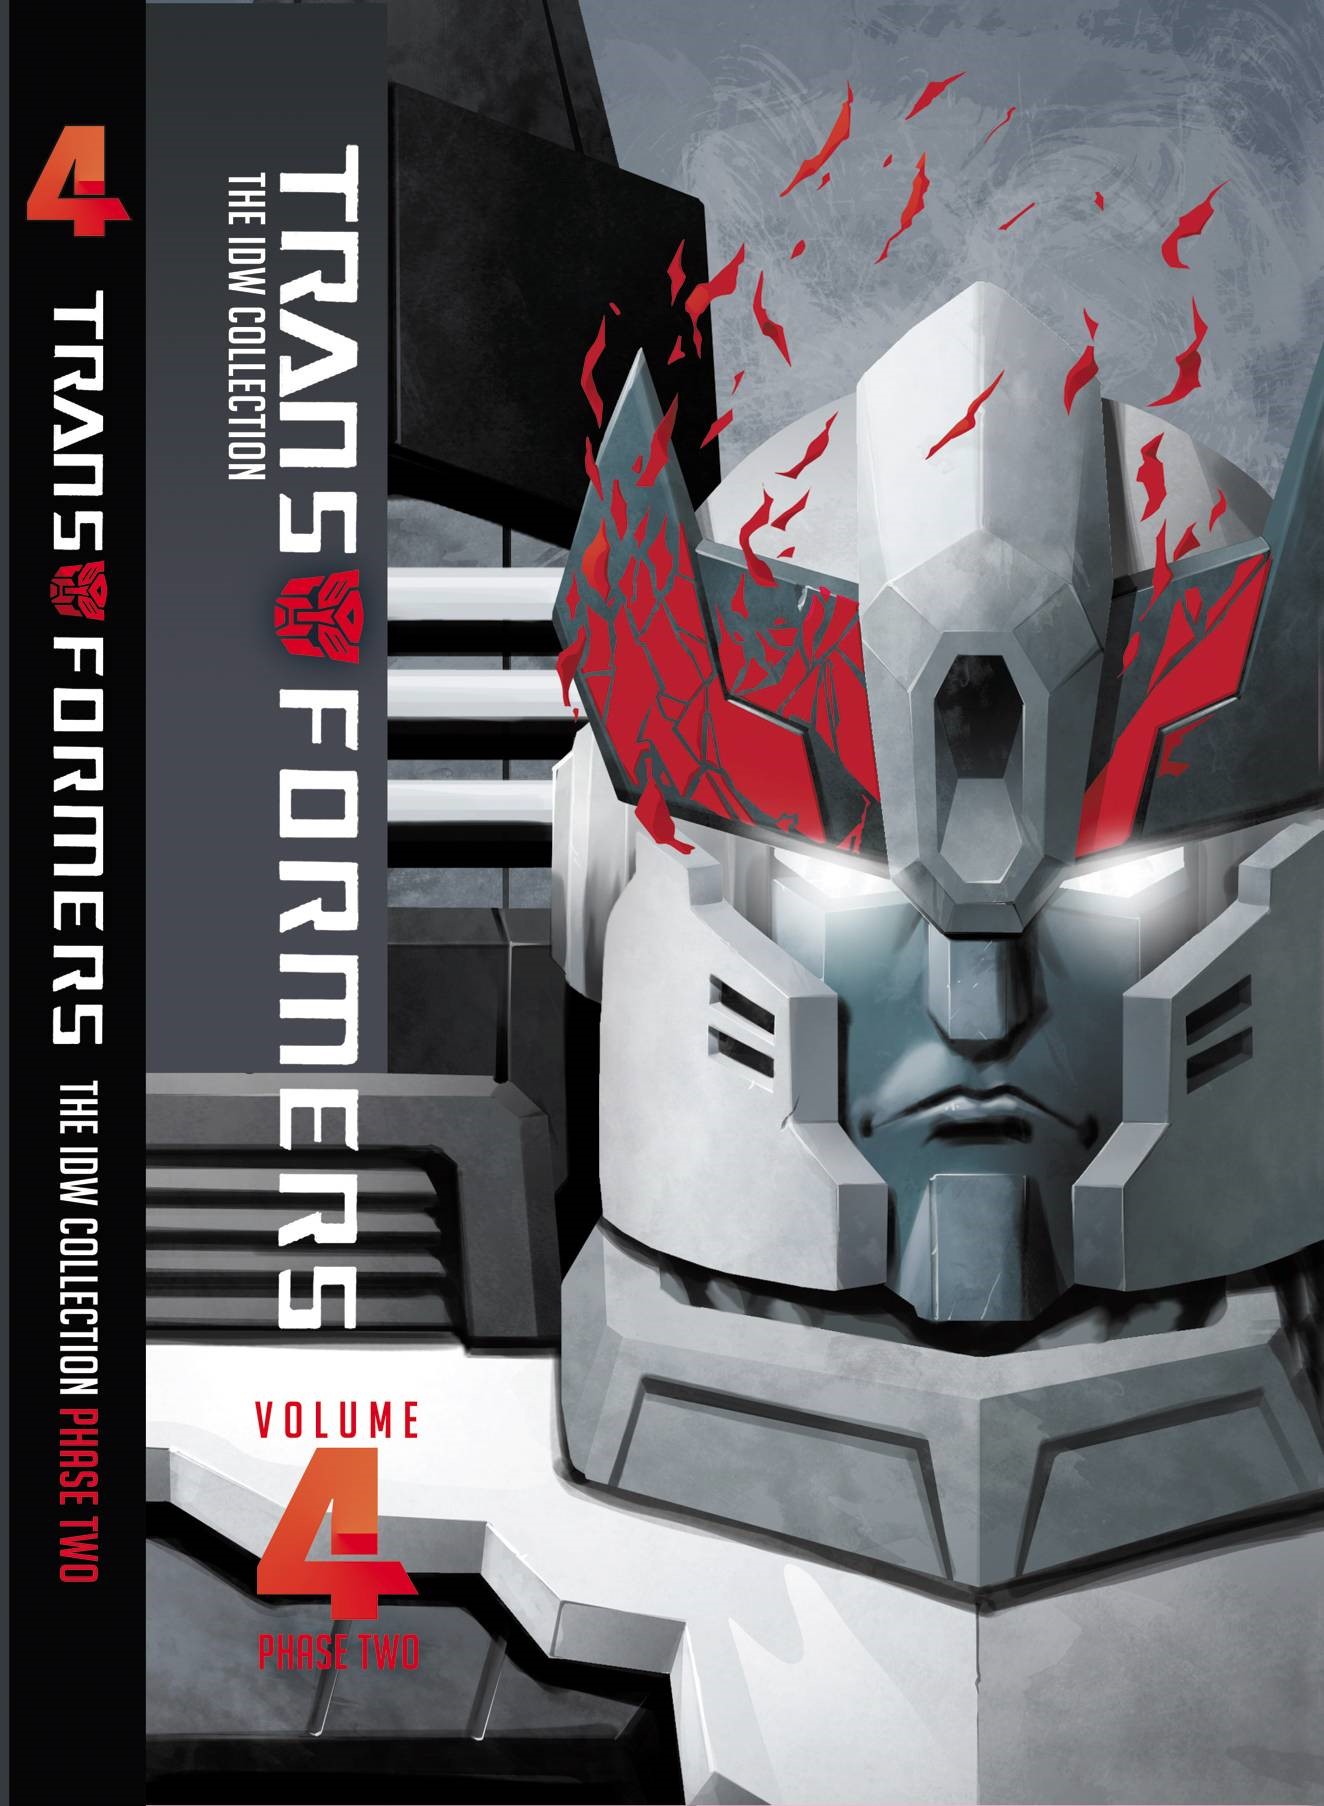 Transformers IDW Collected Phase 2 Hardcover Volume 4